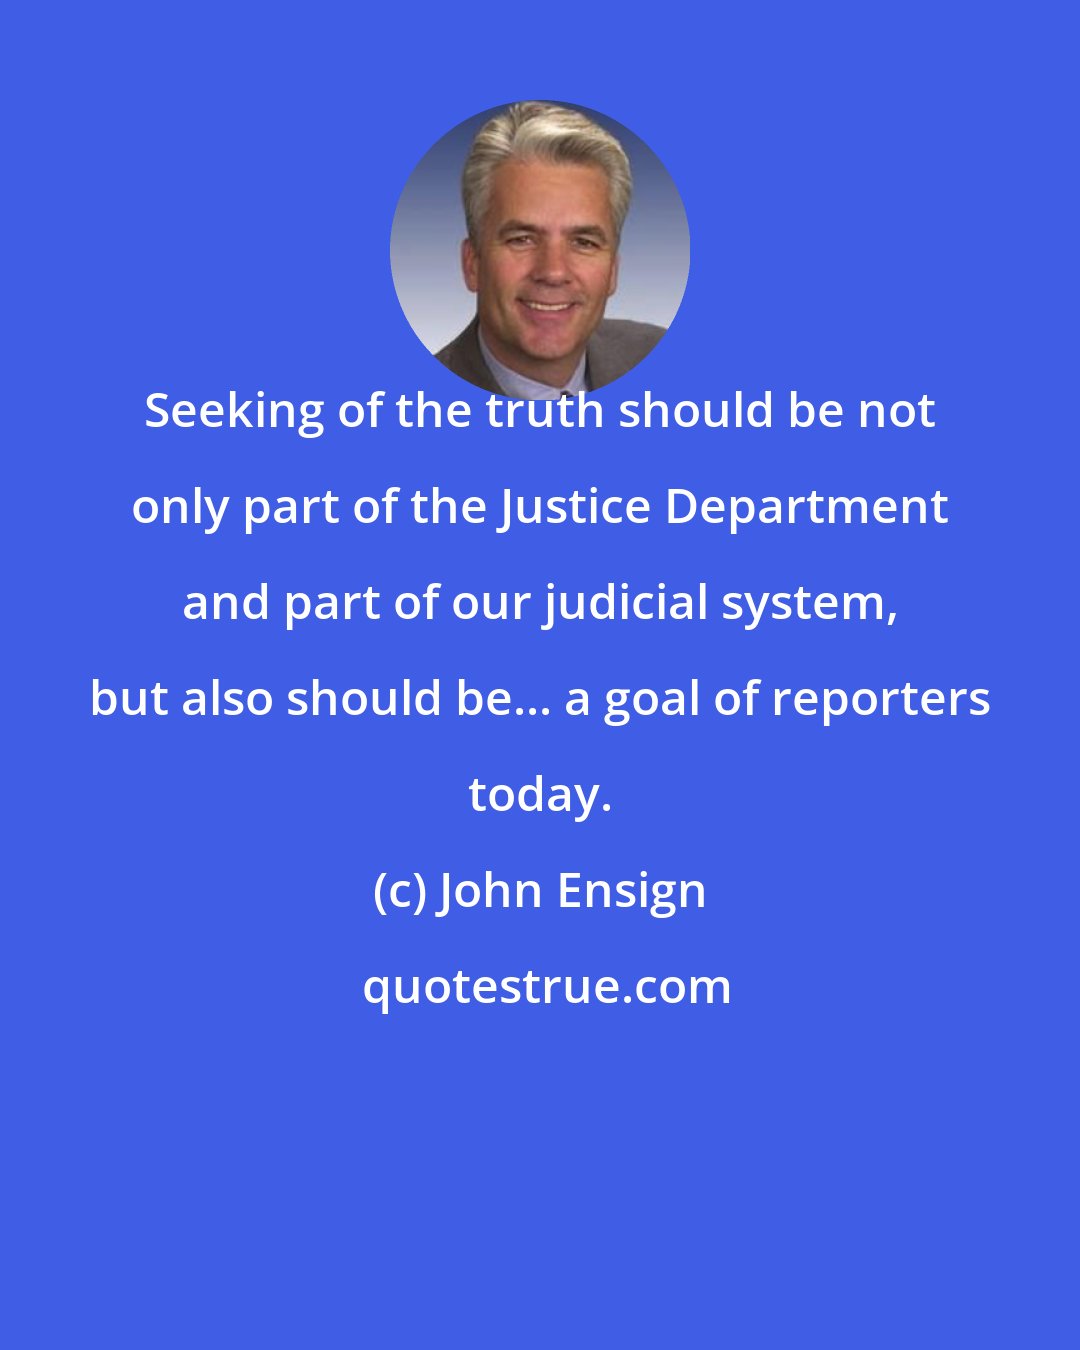 John Ensign: Seeking of the truth should be not only part of the Justice Department and part of our judicial system, but also should be... a goal of reporters today.